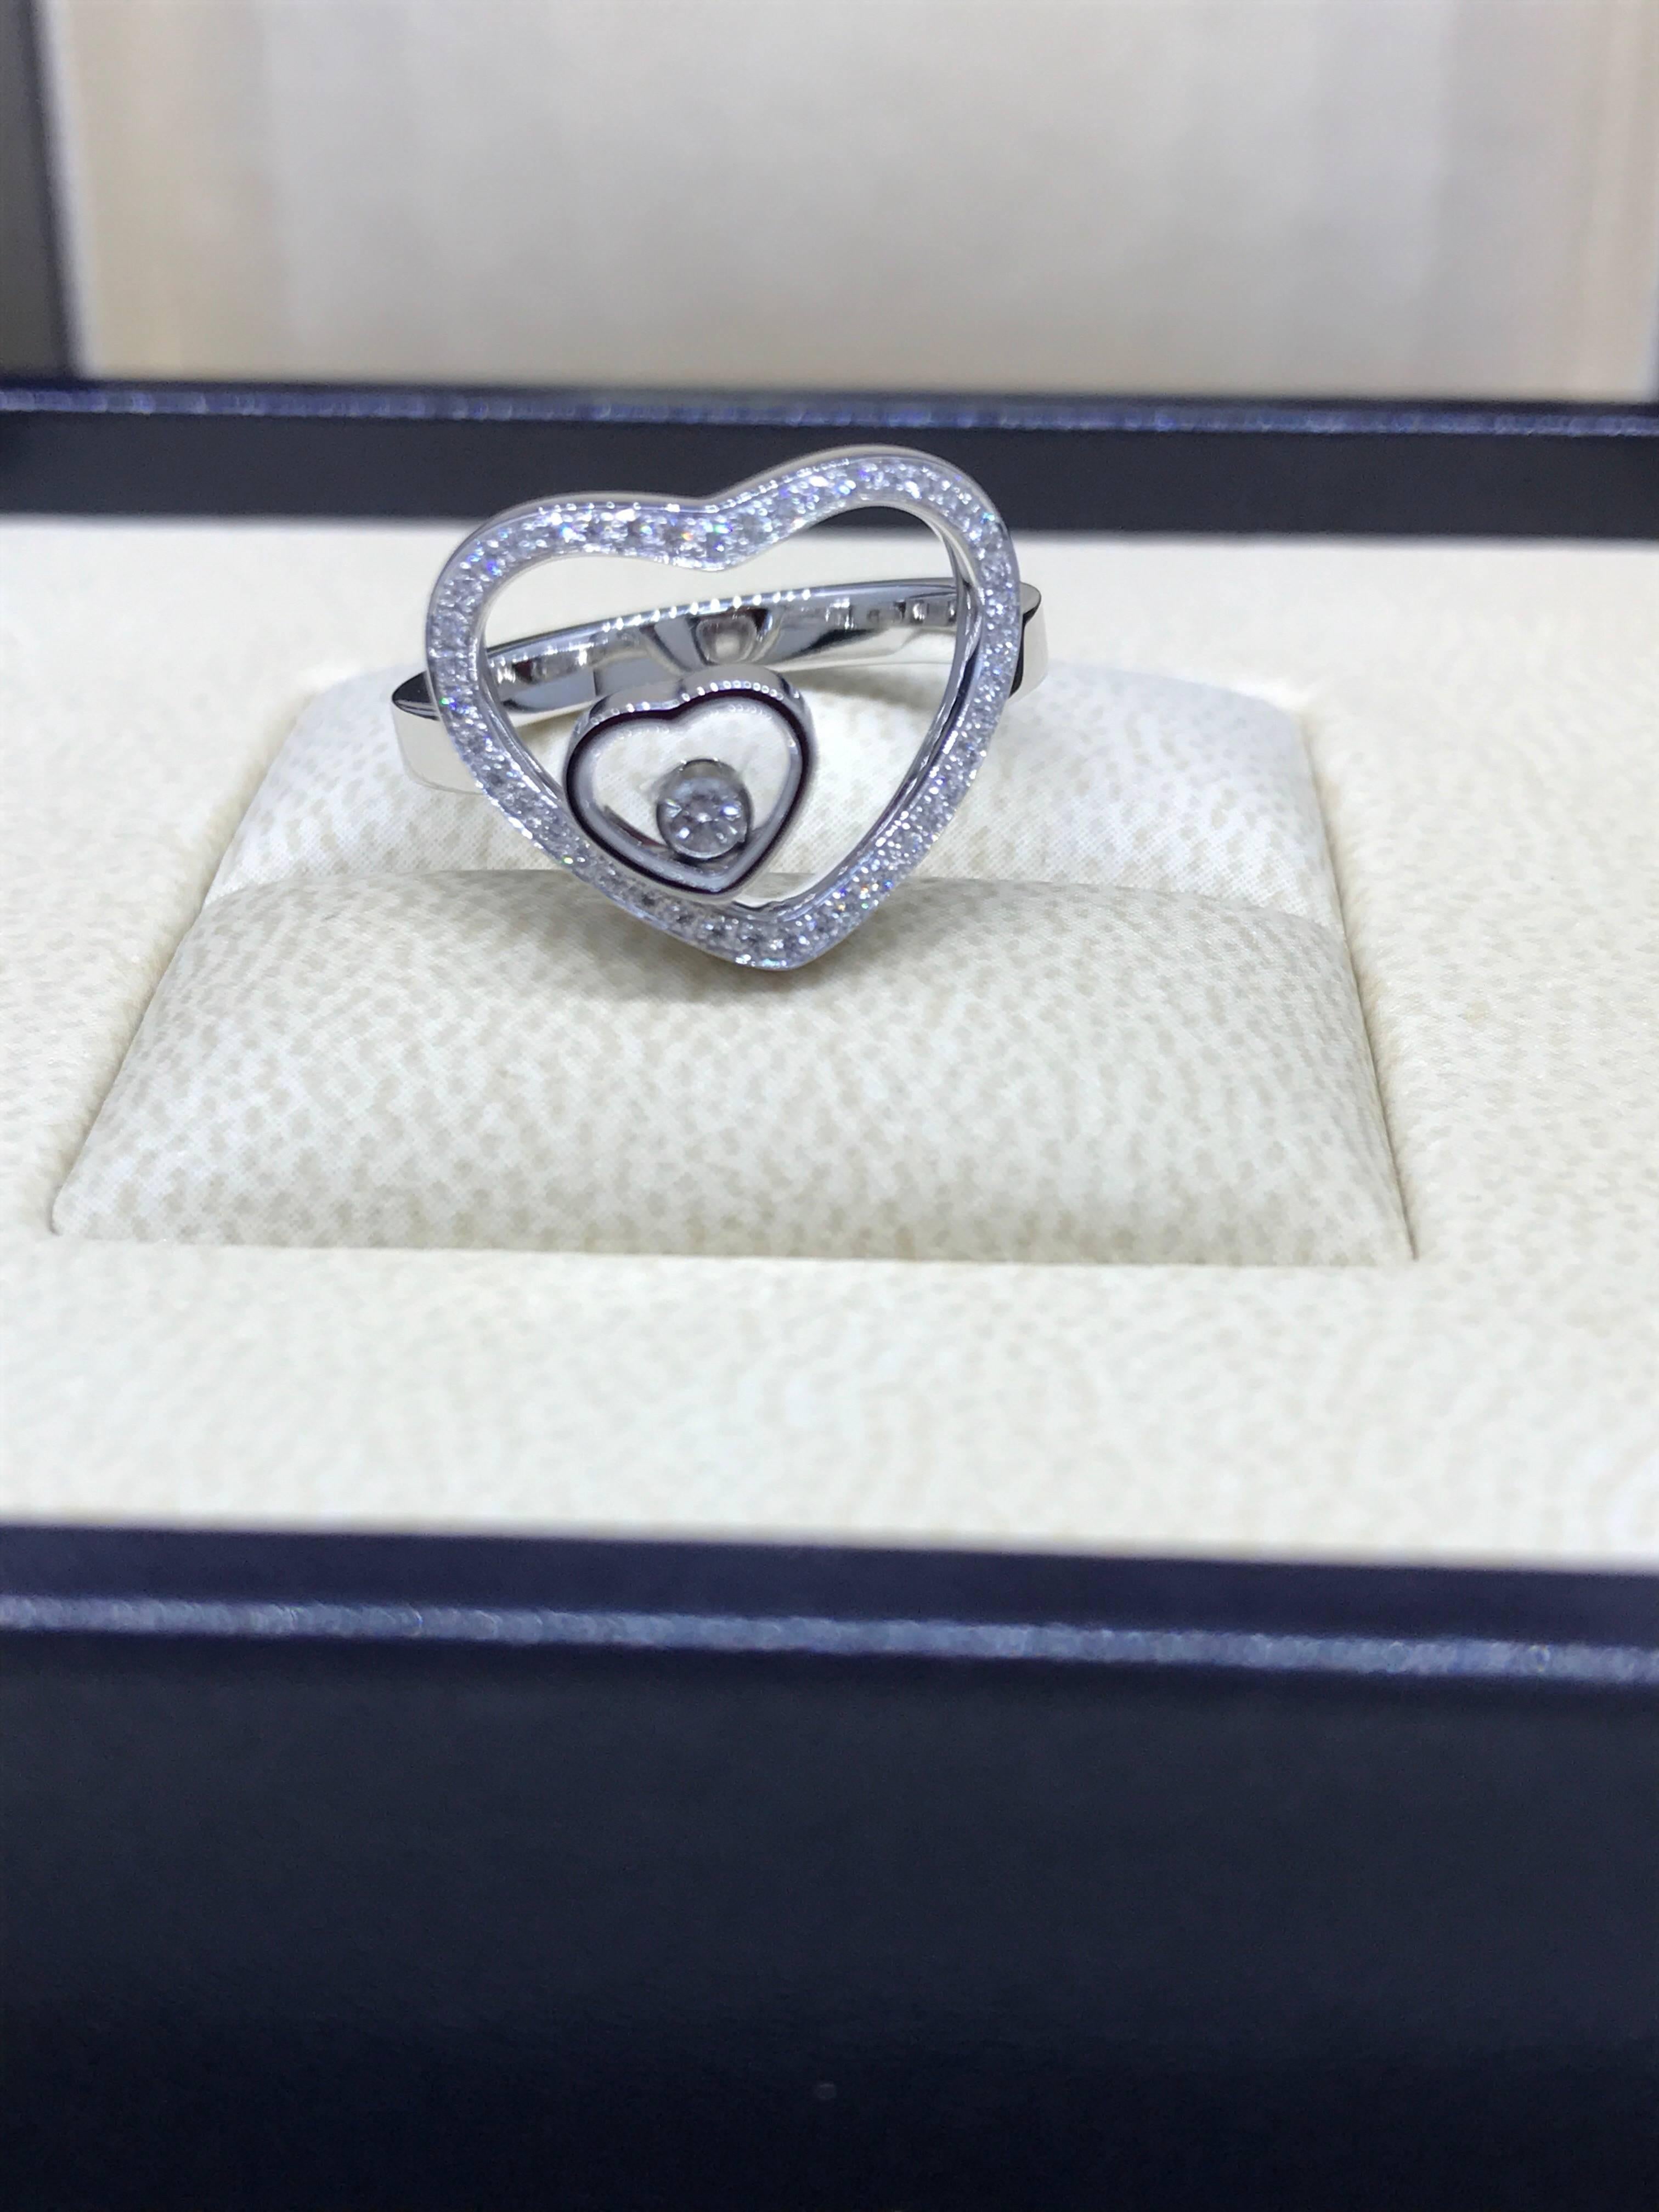 Chopard Happy Diamonds Heart Shaped ring

Model number: 82/7482-1018

100% Authentic

Brand New

Comes complete with original Chopard box, certificate of authenticity and warranty, and jewels manual

18 karat white gold

Ring weight: 5.5GR

Size 6